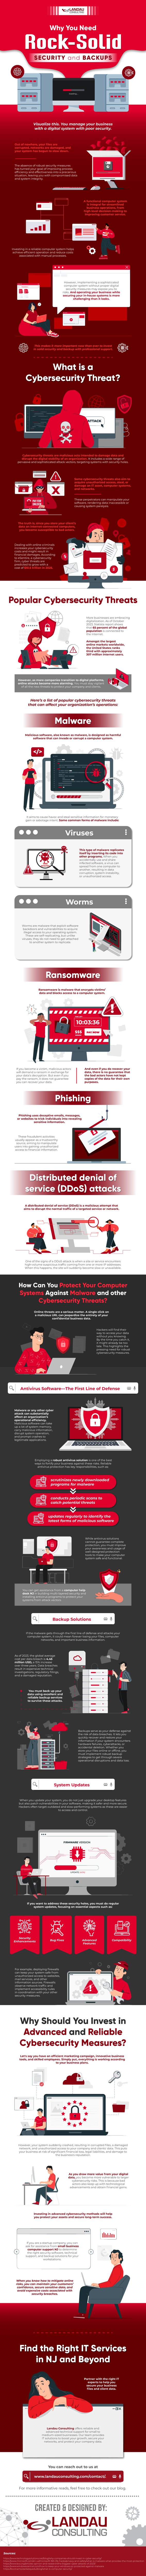 Why-You-Need-Rock-Solid-Security-and-Backups-Infographic-Image